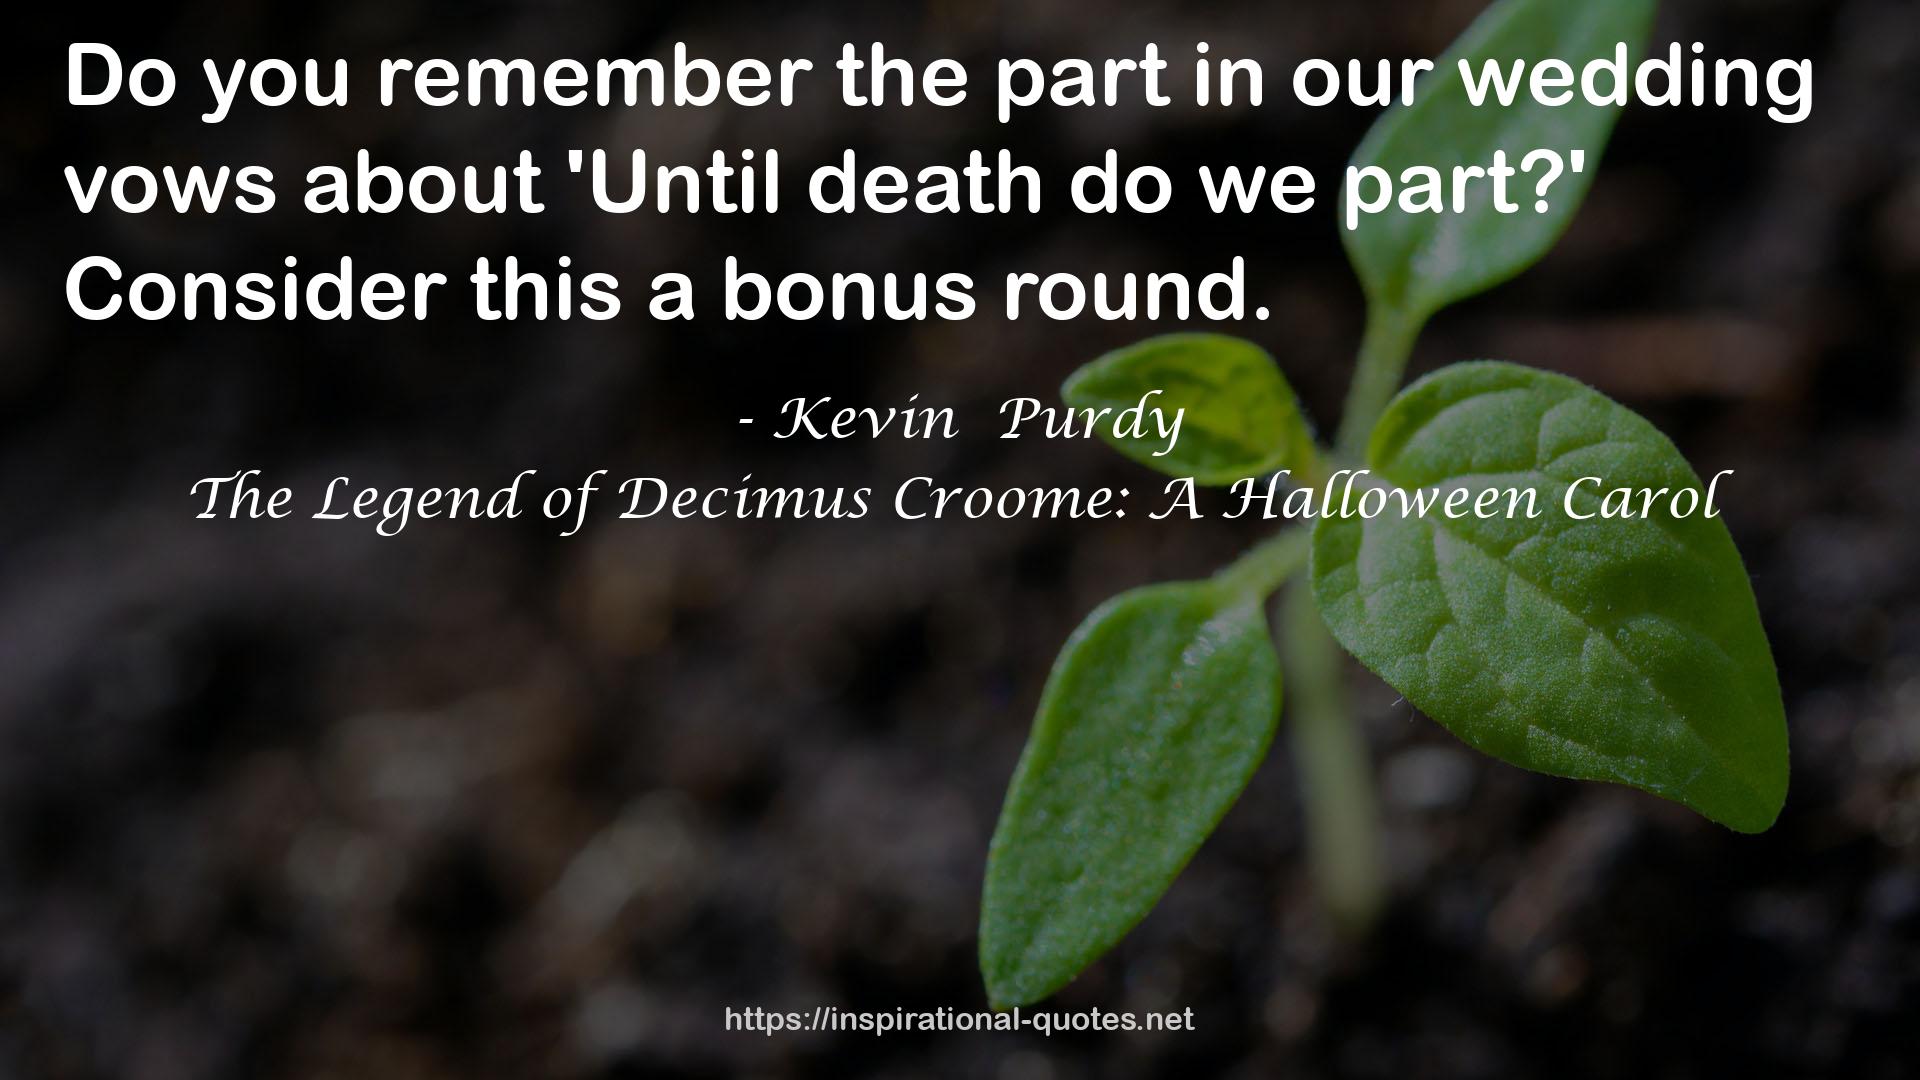 The Legend of Decimus Croome: A Halloween Carol QUOTES